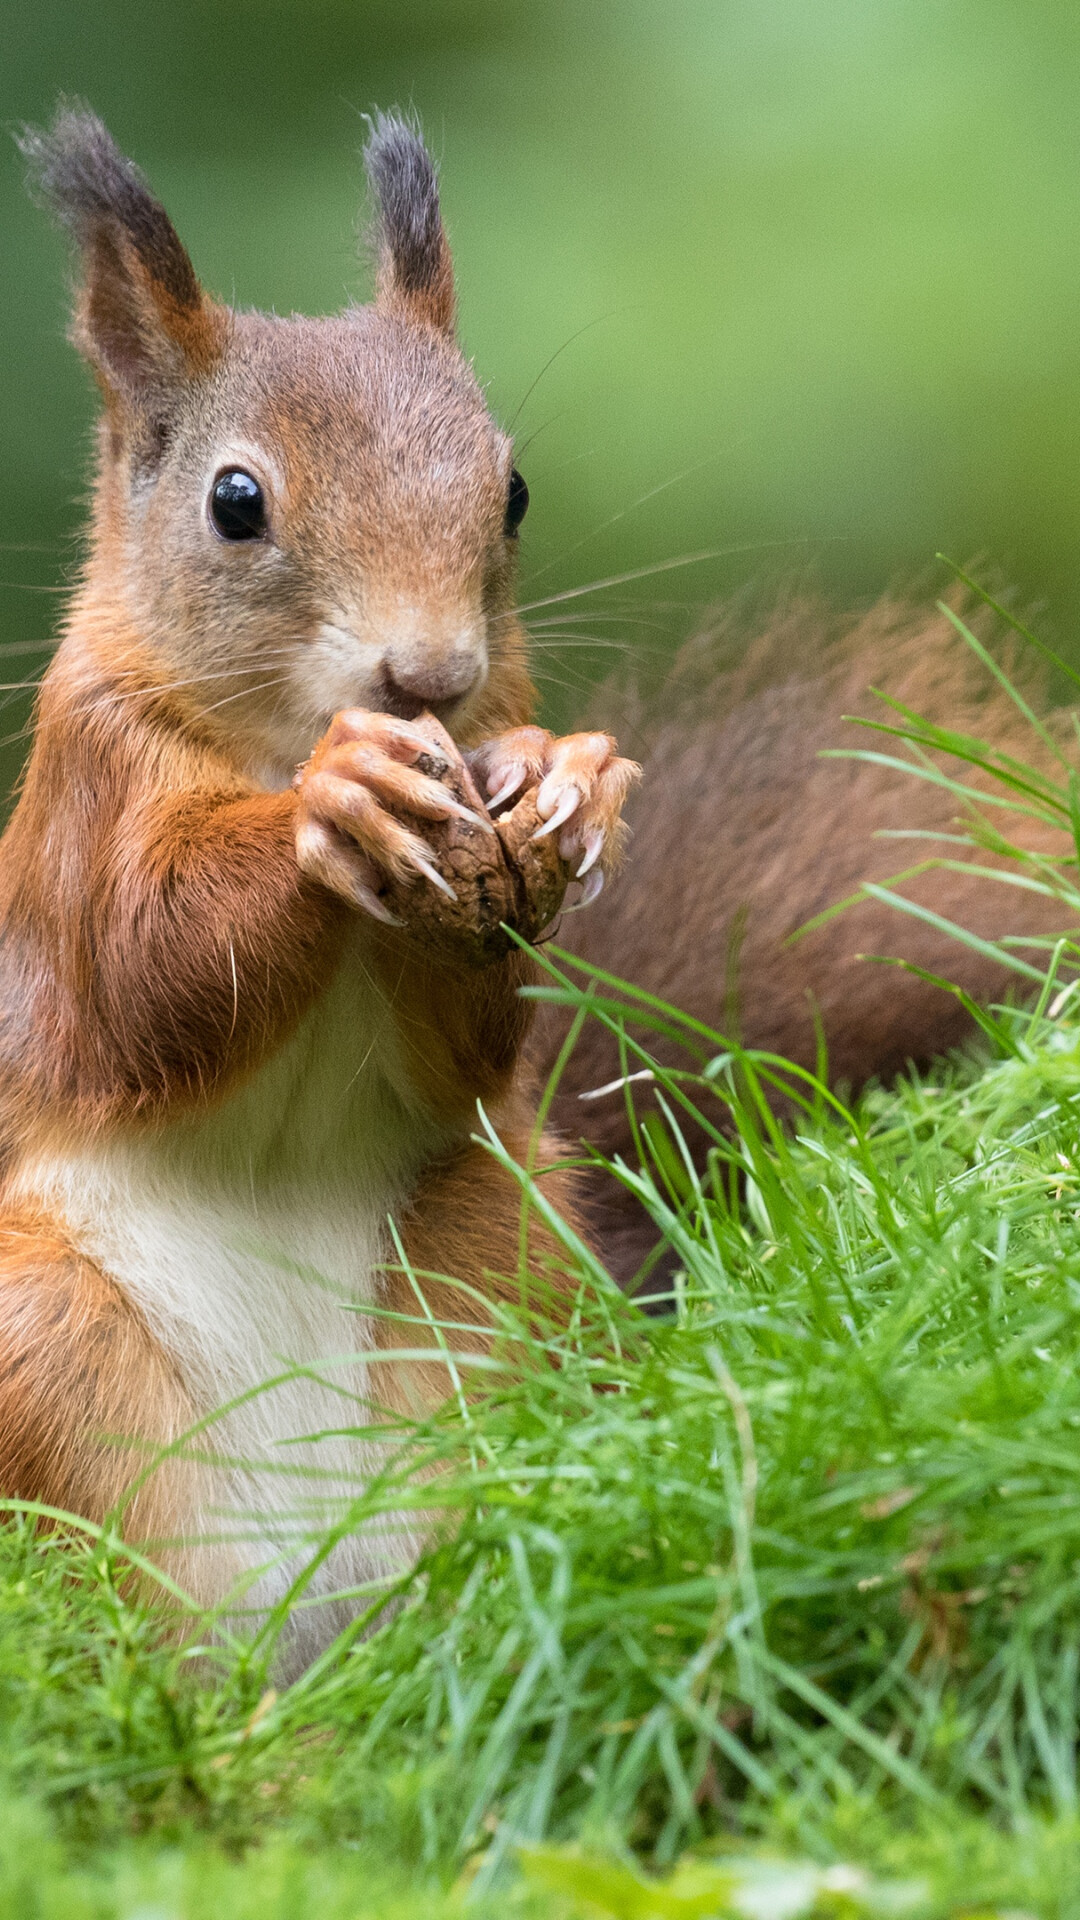 Squirrel: Bushy-tailed rodents, Eat nuts, leaves, roots, seeds, and other plants. 1080x1920 Full HD Background.